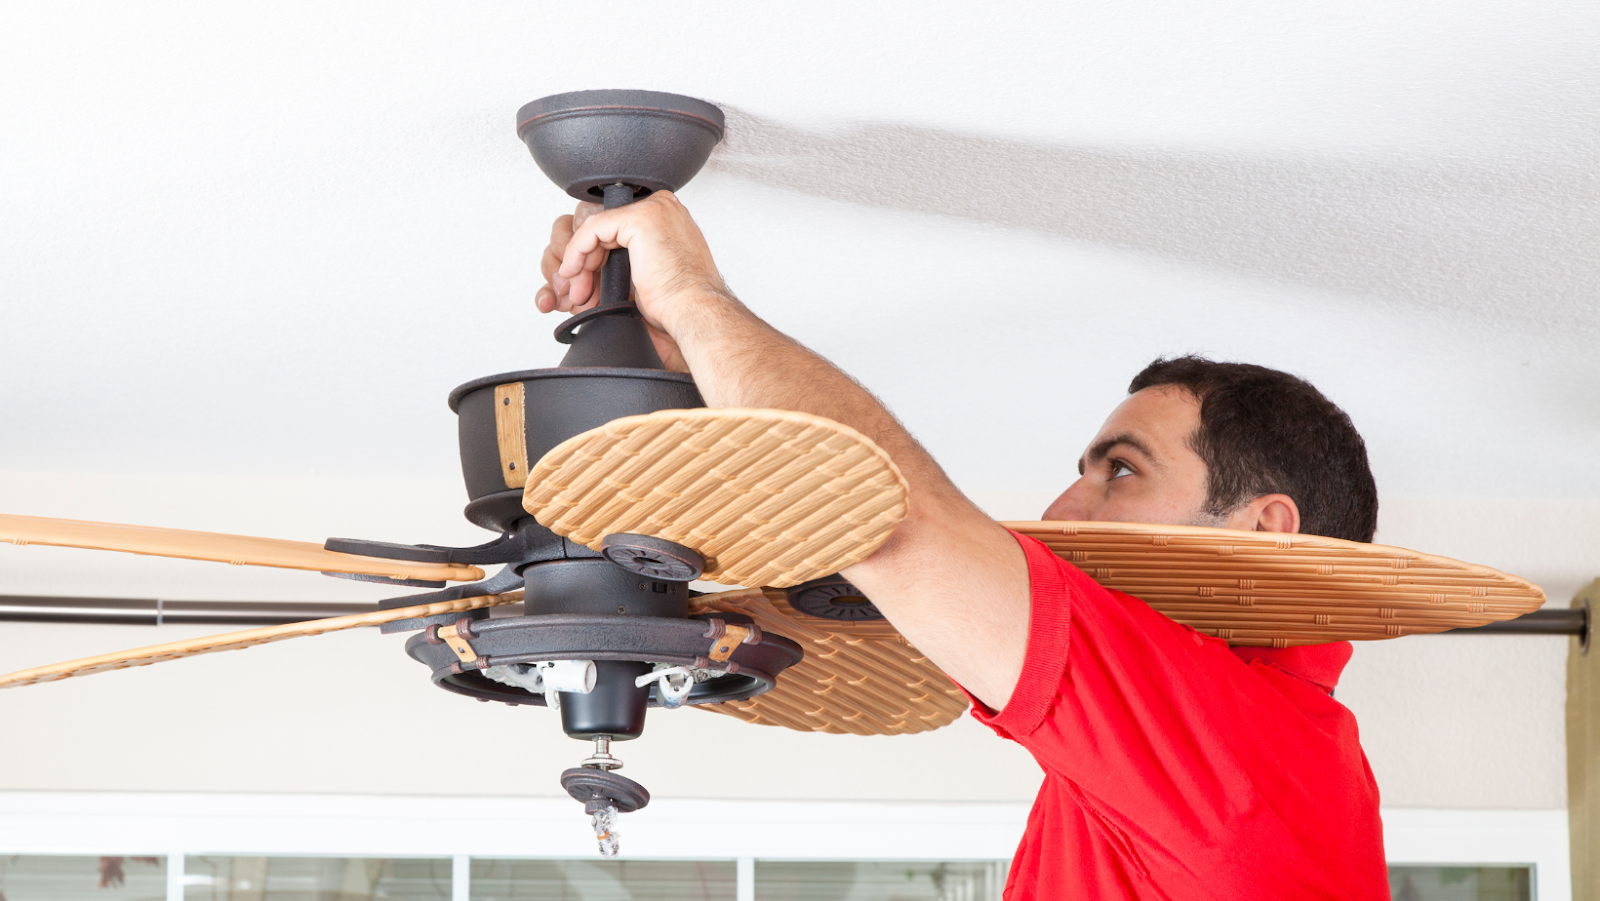 What to Consider When Buying an Indoor vs. Outdoor Ceiling Fan